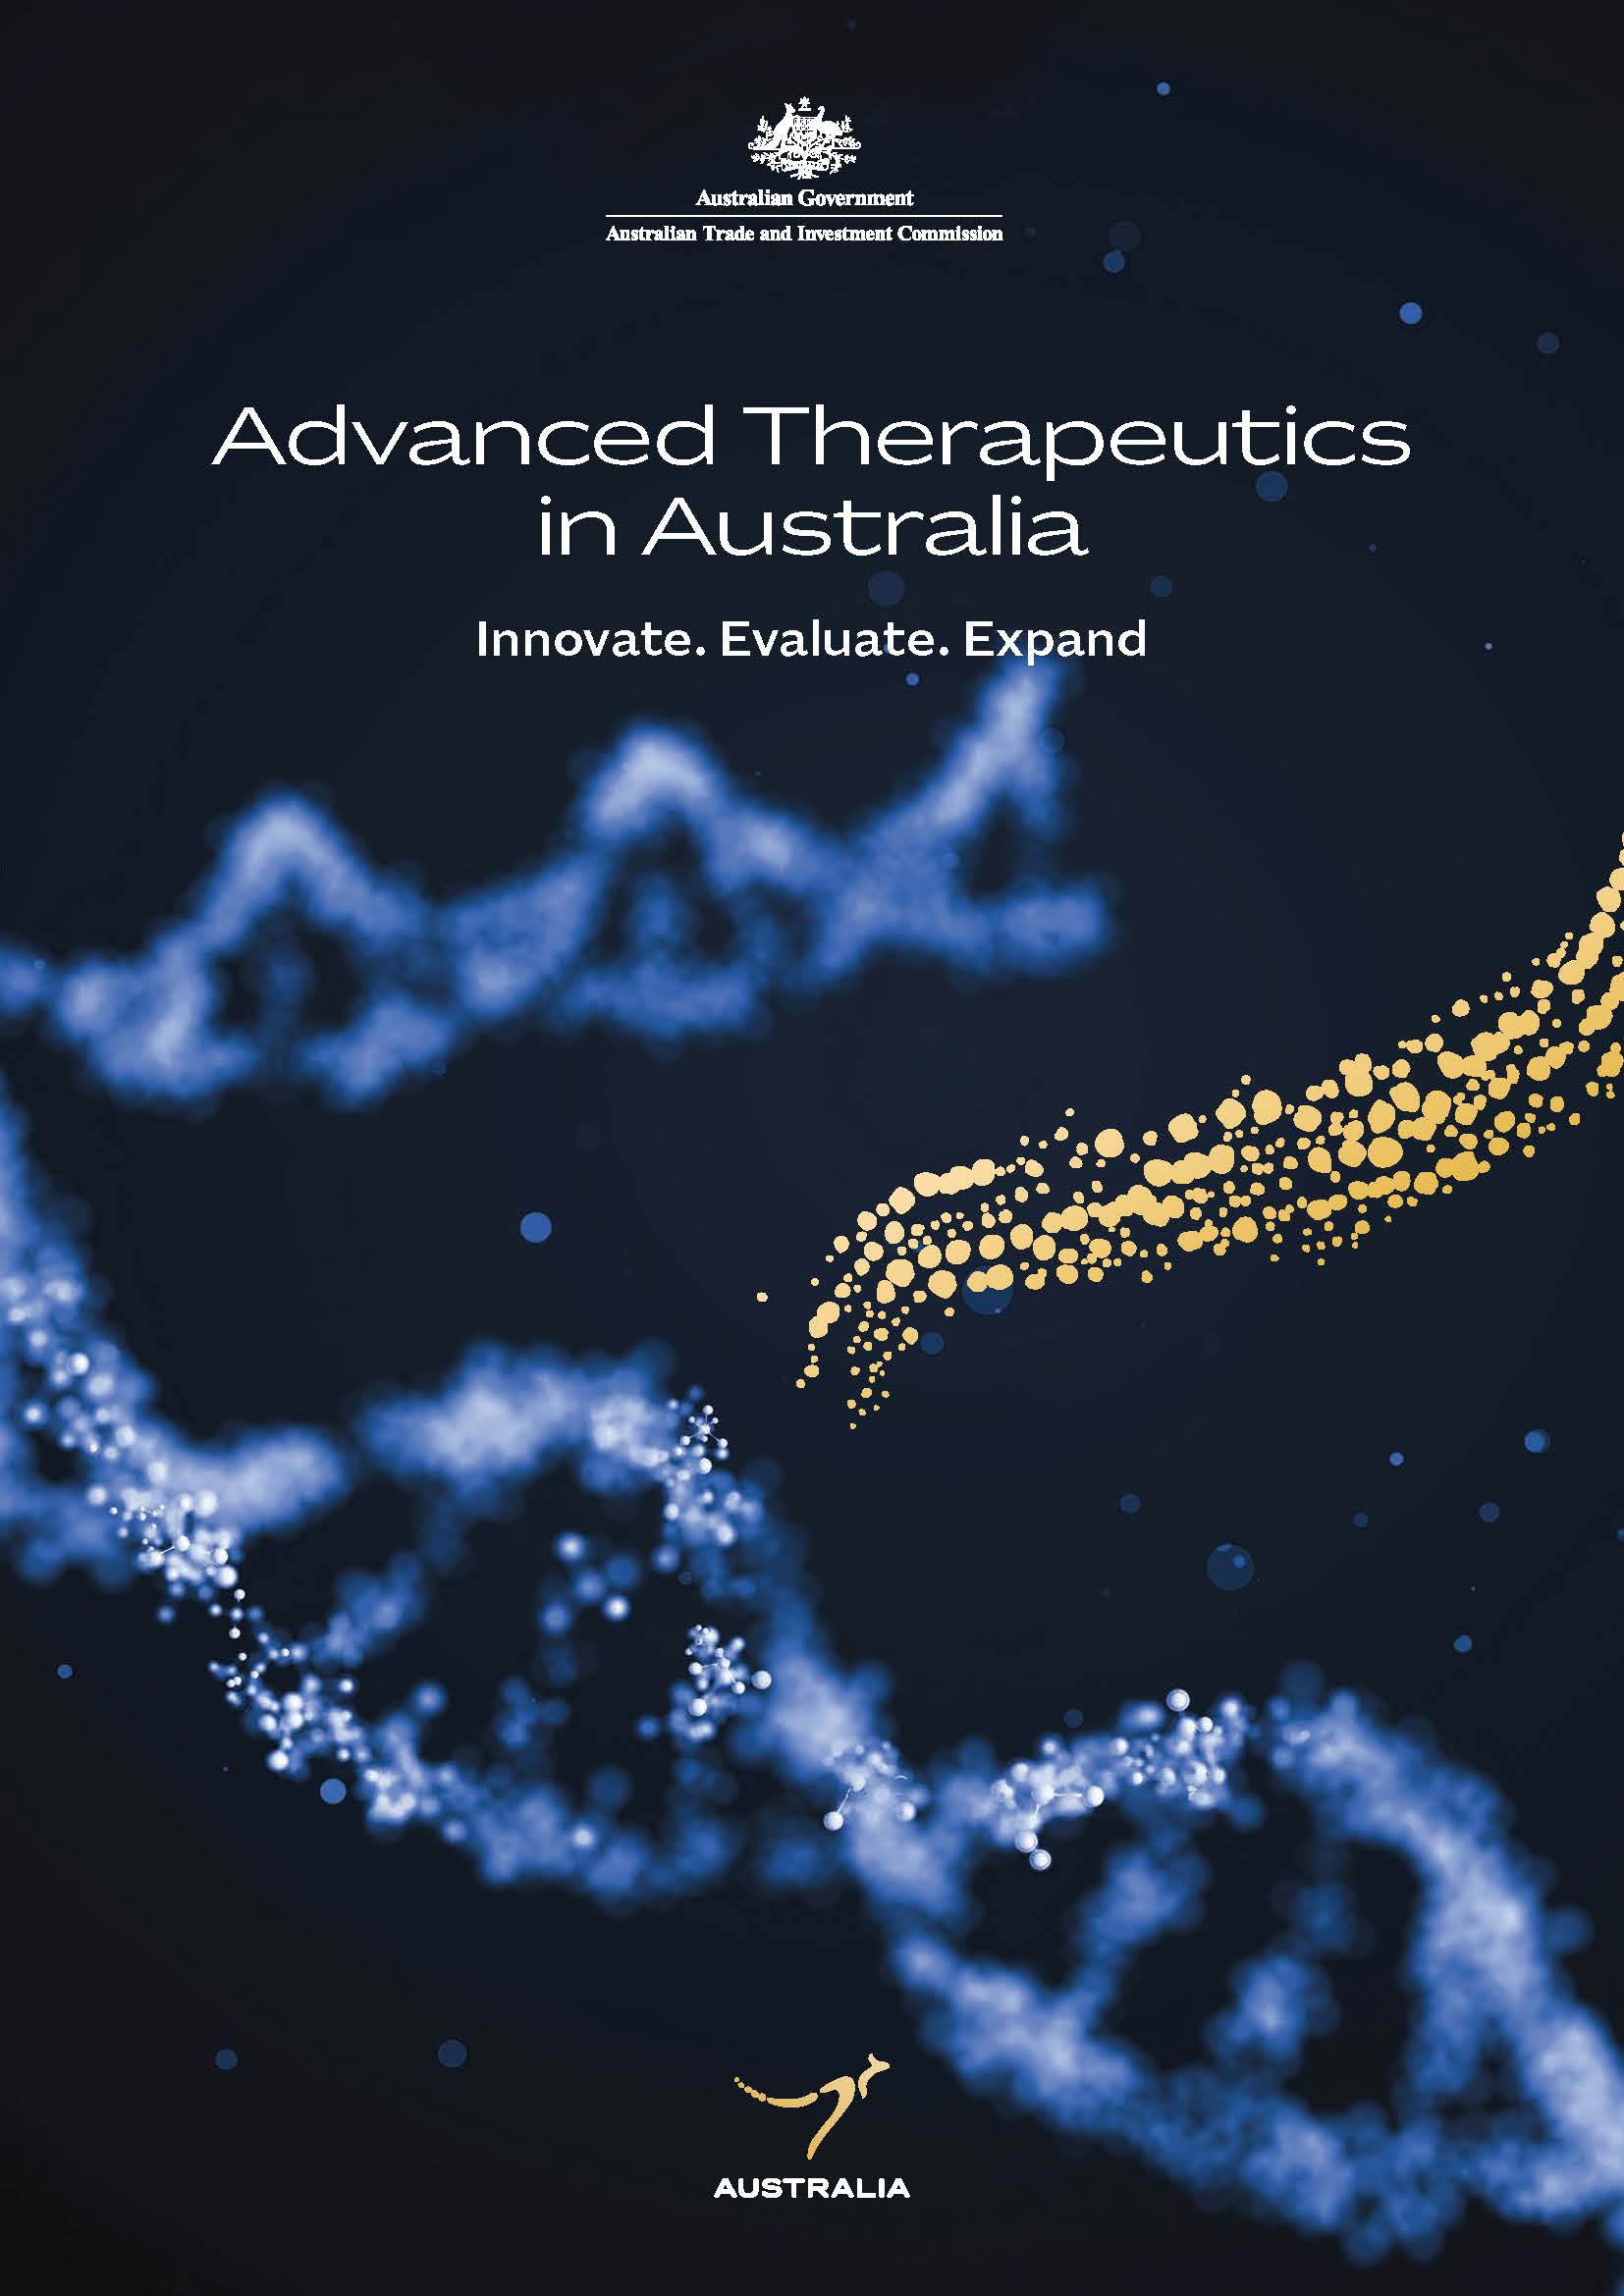 Advanced Therapeutics in Australia 2023 cover showing a blue double helix on a black background